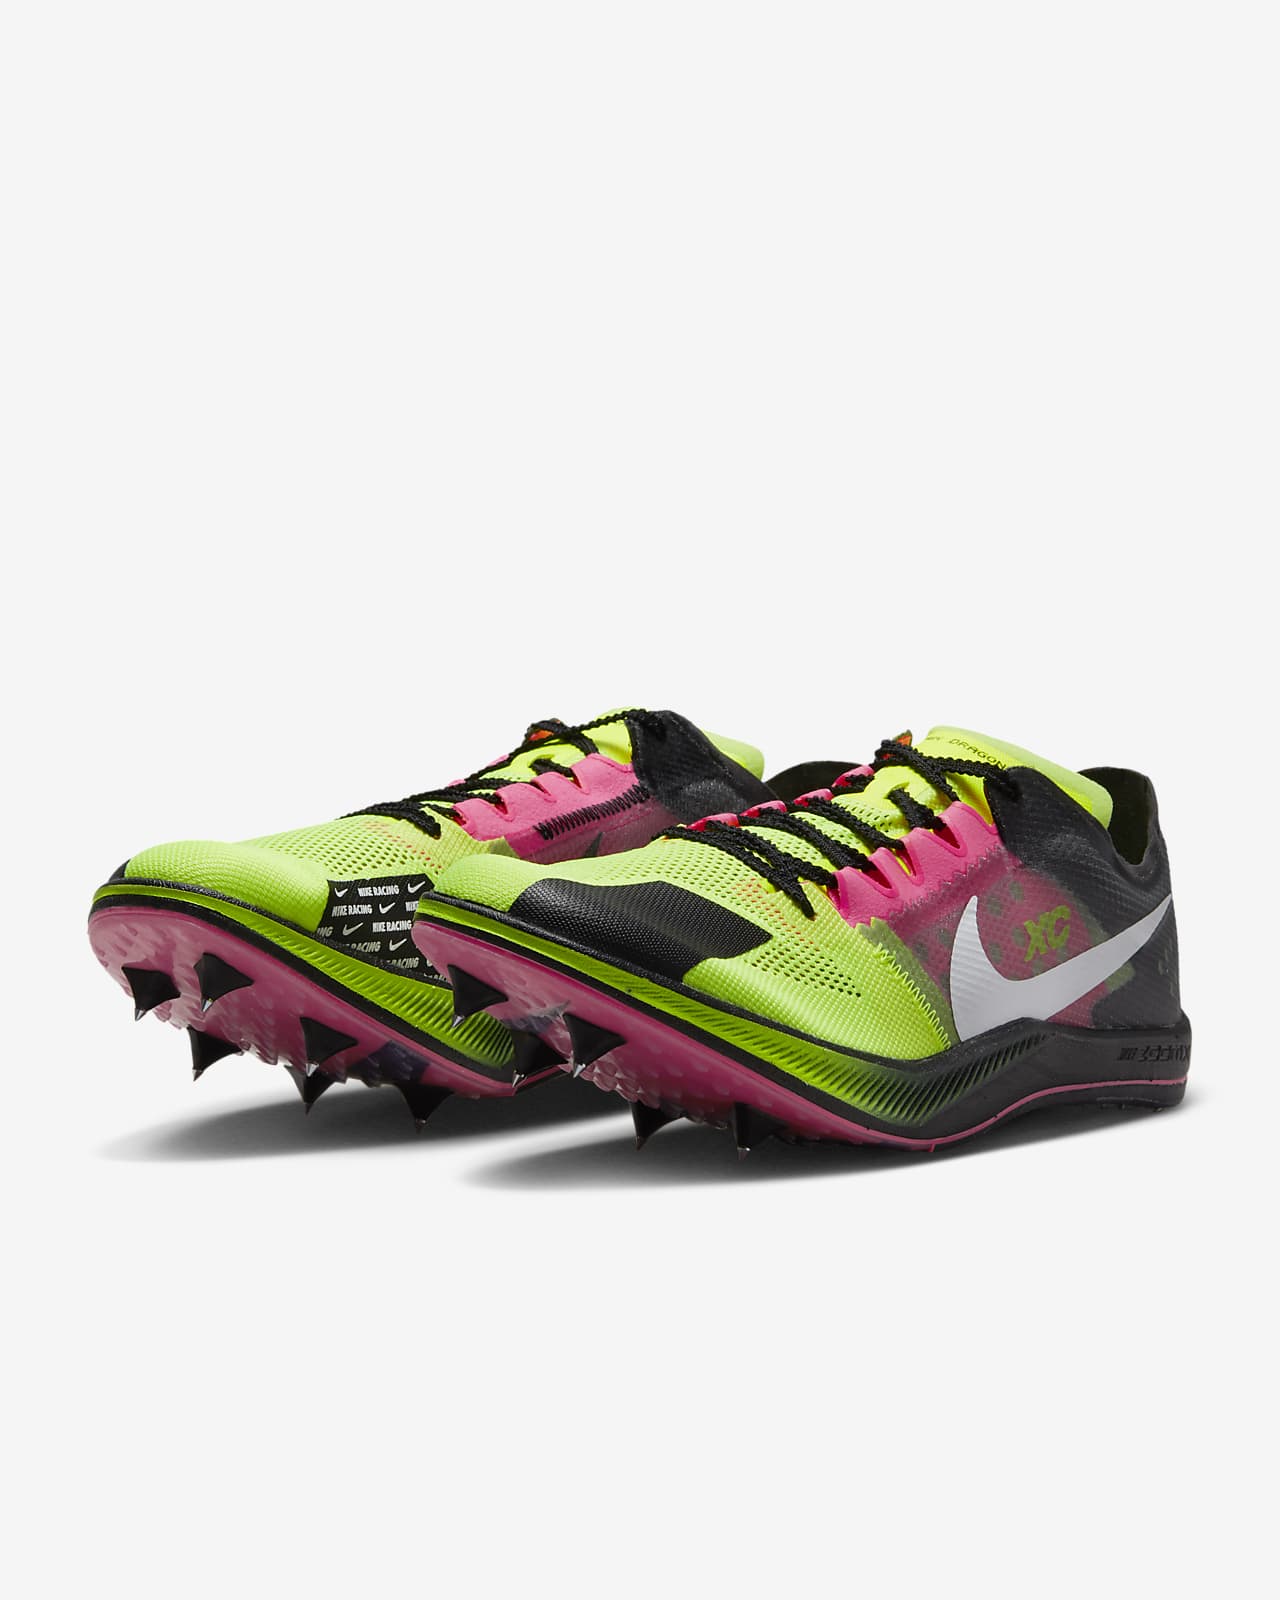 Nike ZoomX Dragonfly XC Cross-Country Spikes. Nike NZ